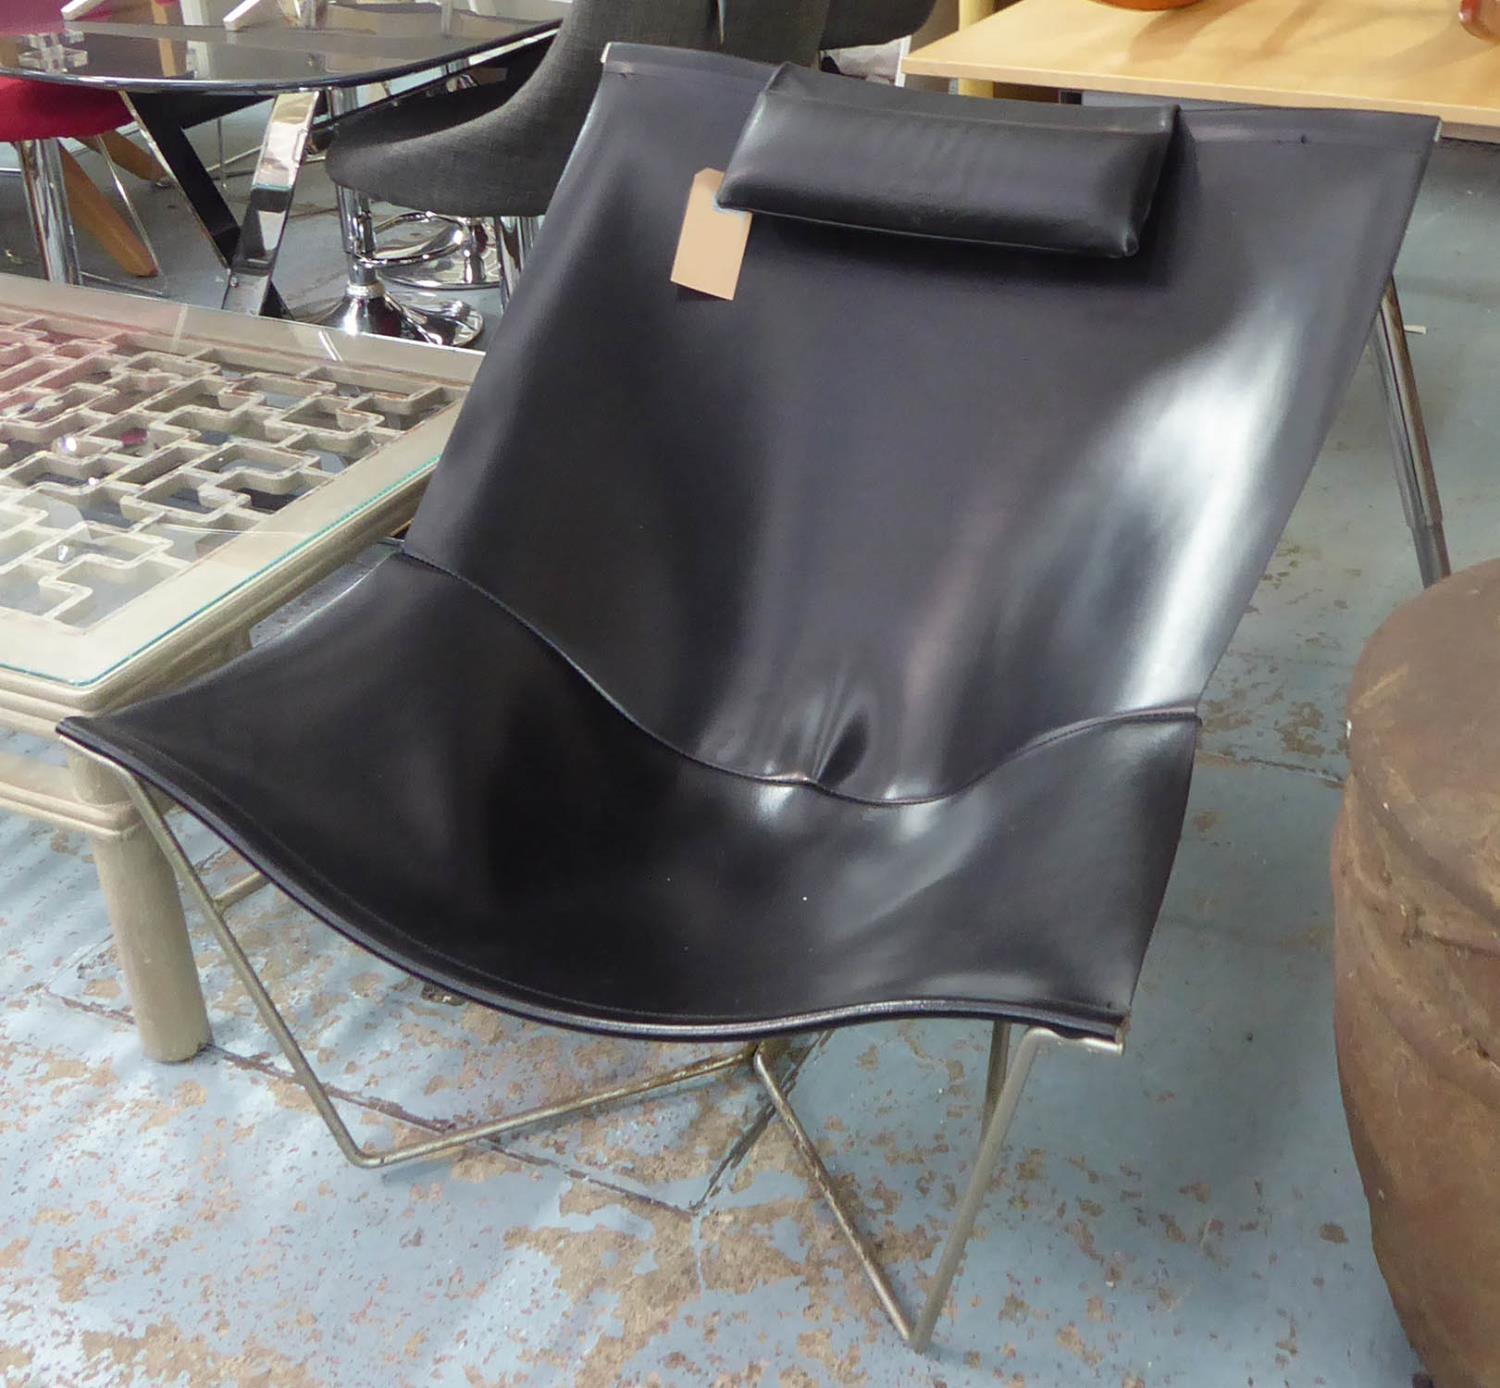 LOUNGE CHAIR, contemporary slung leather design, 80cm H approx. (slight faults)